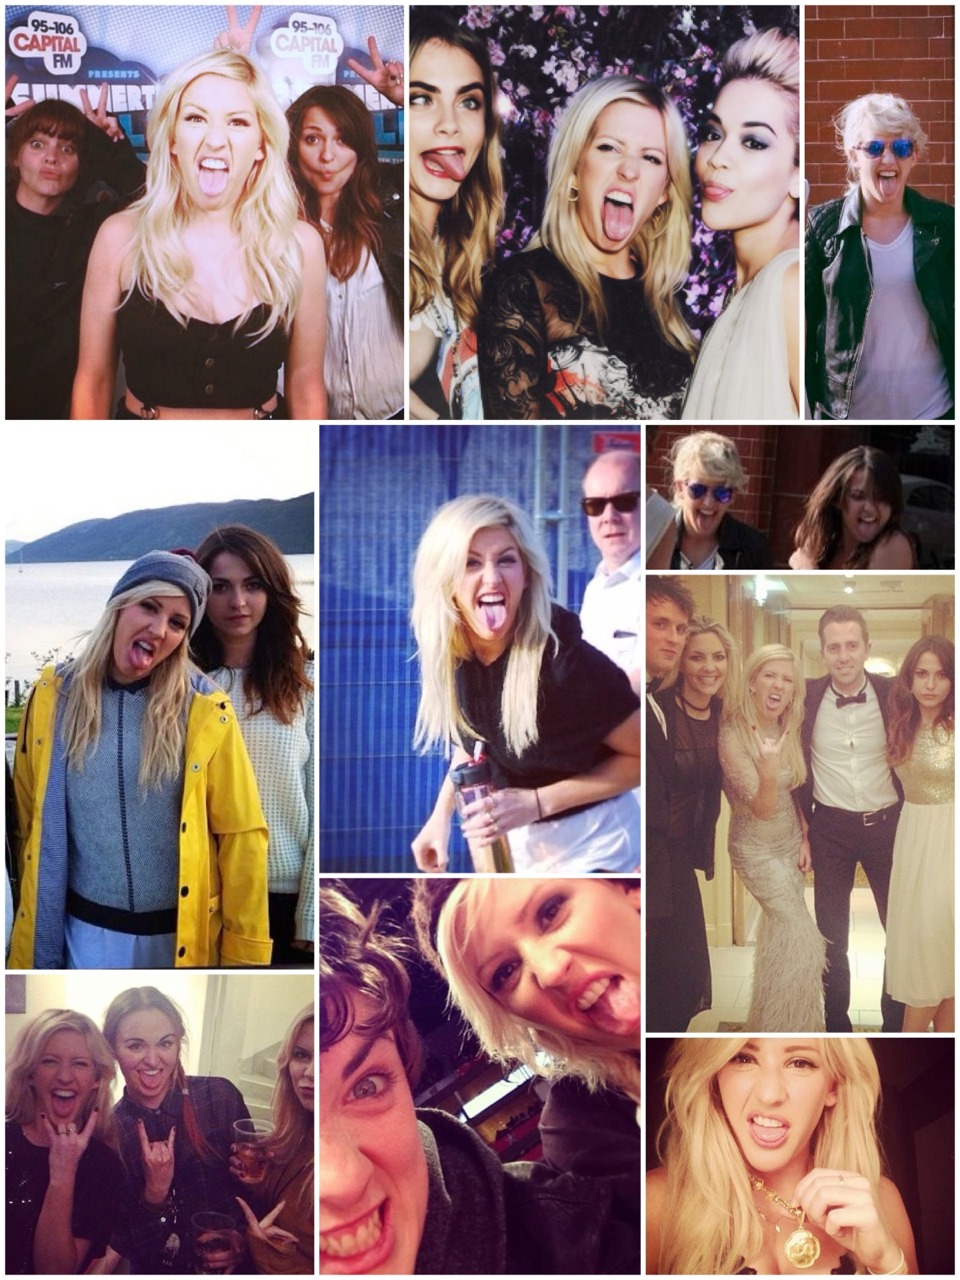 Ellie Goulding tongue thing